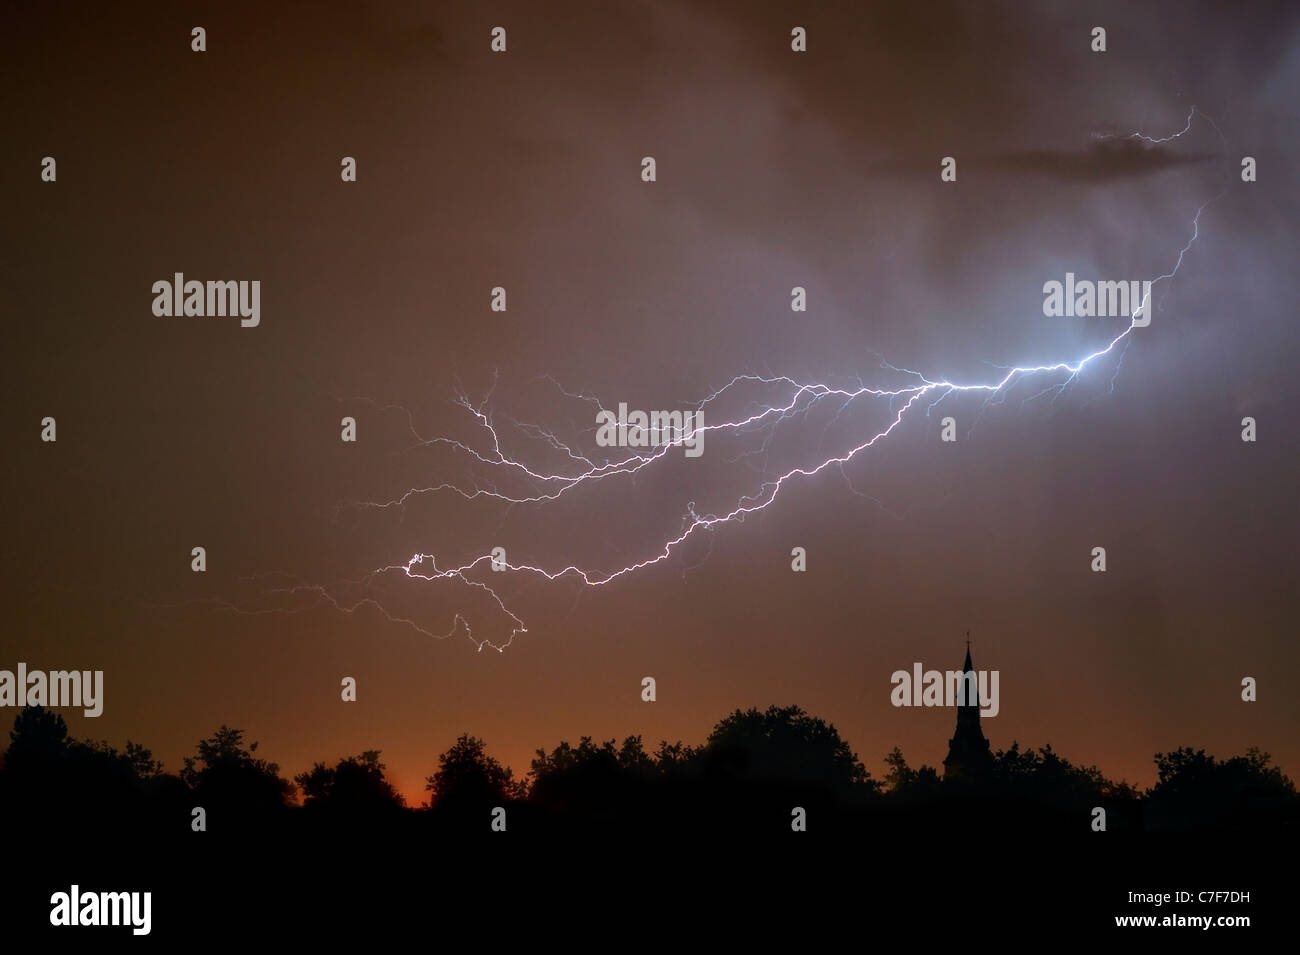 Forked lightning during thunderstorm at night over church tower and trees, Belgium Stock Photo